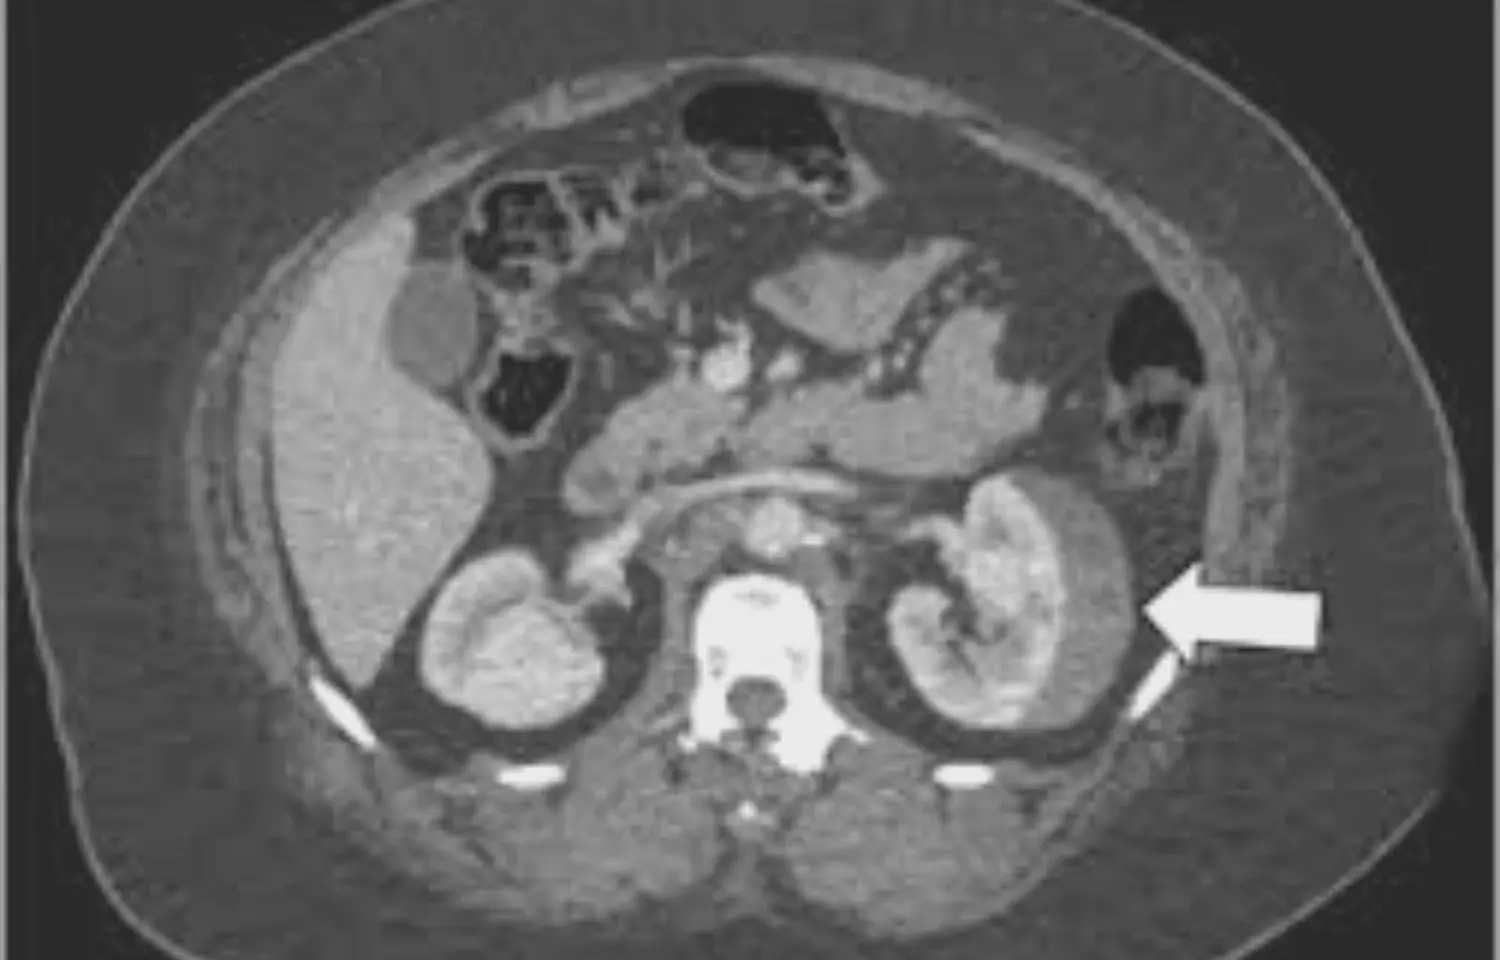 Repeat CT imaging can be safely omitted in uncomplicated blunt renal injuries: Study